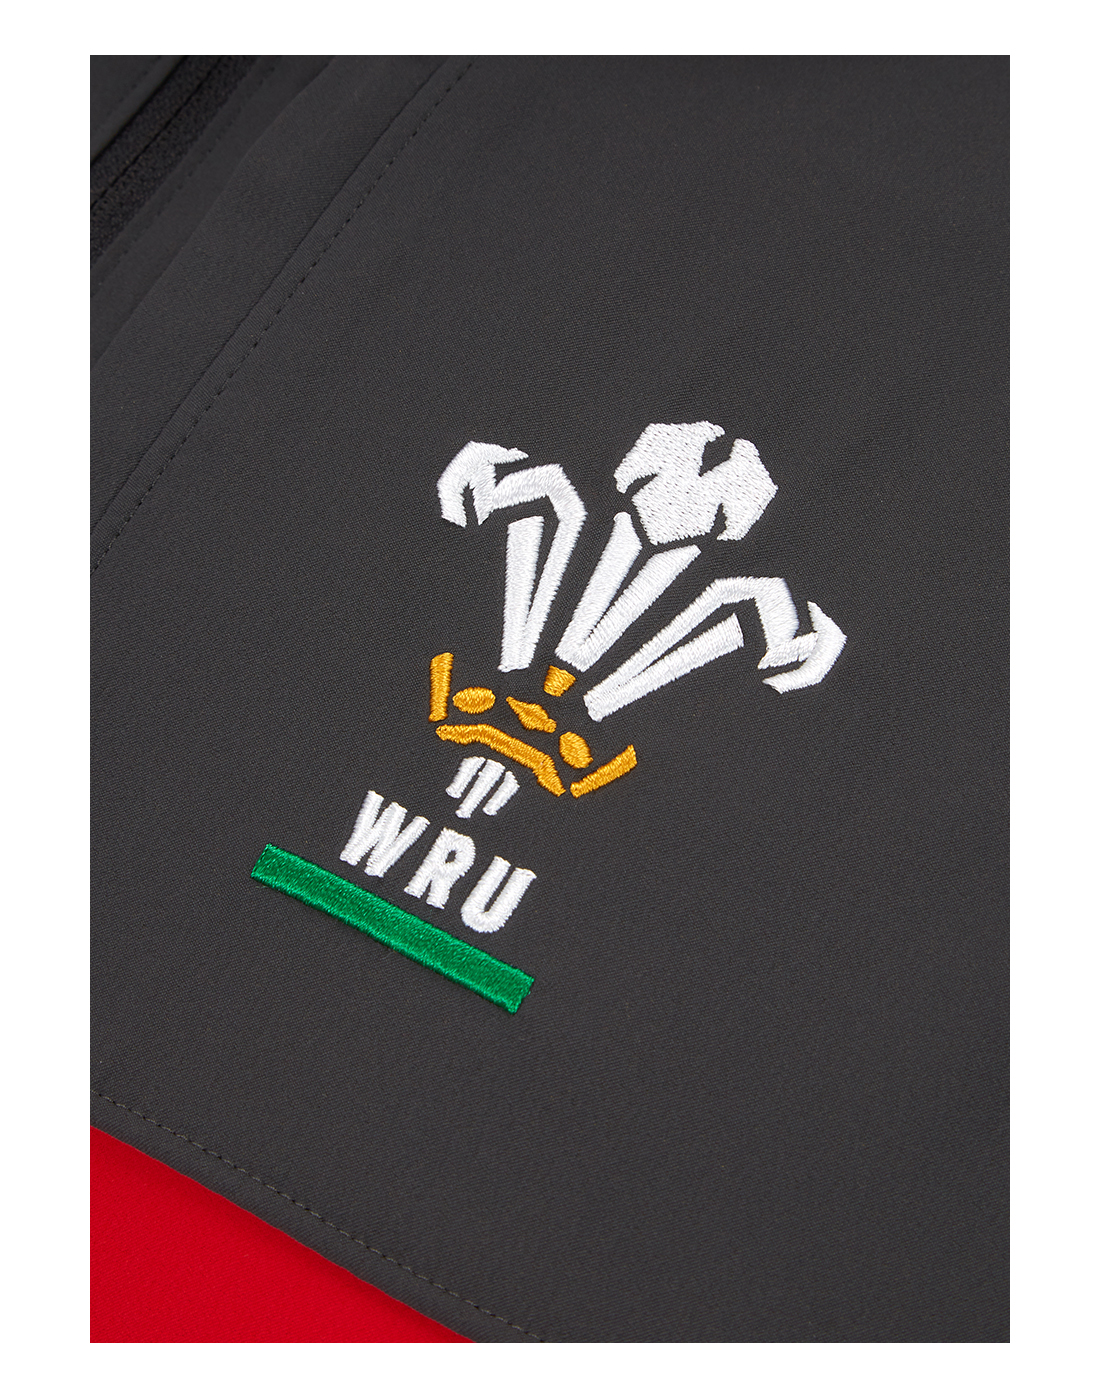 Genuine Under Armour WRU Wales Supporters Jacket Adults Jackets Men's 1343928 